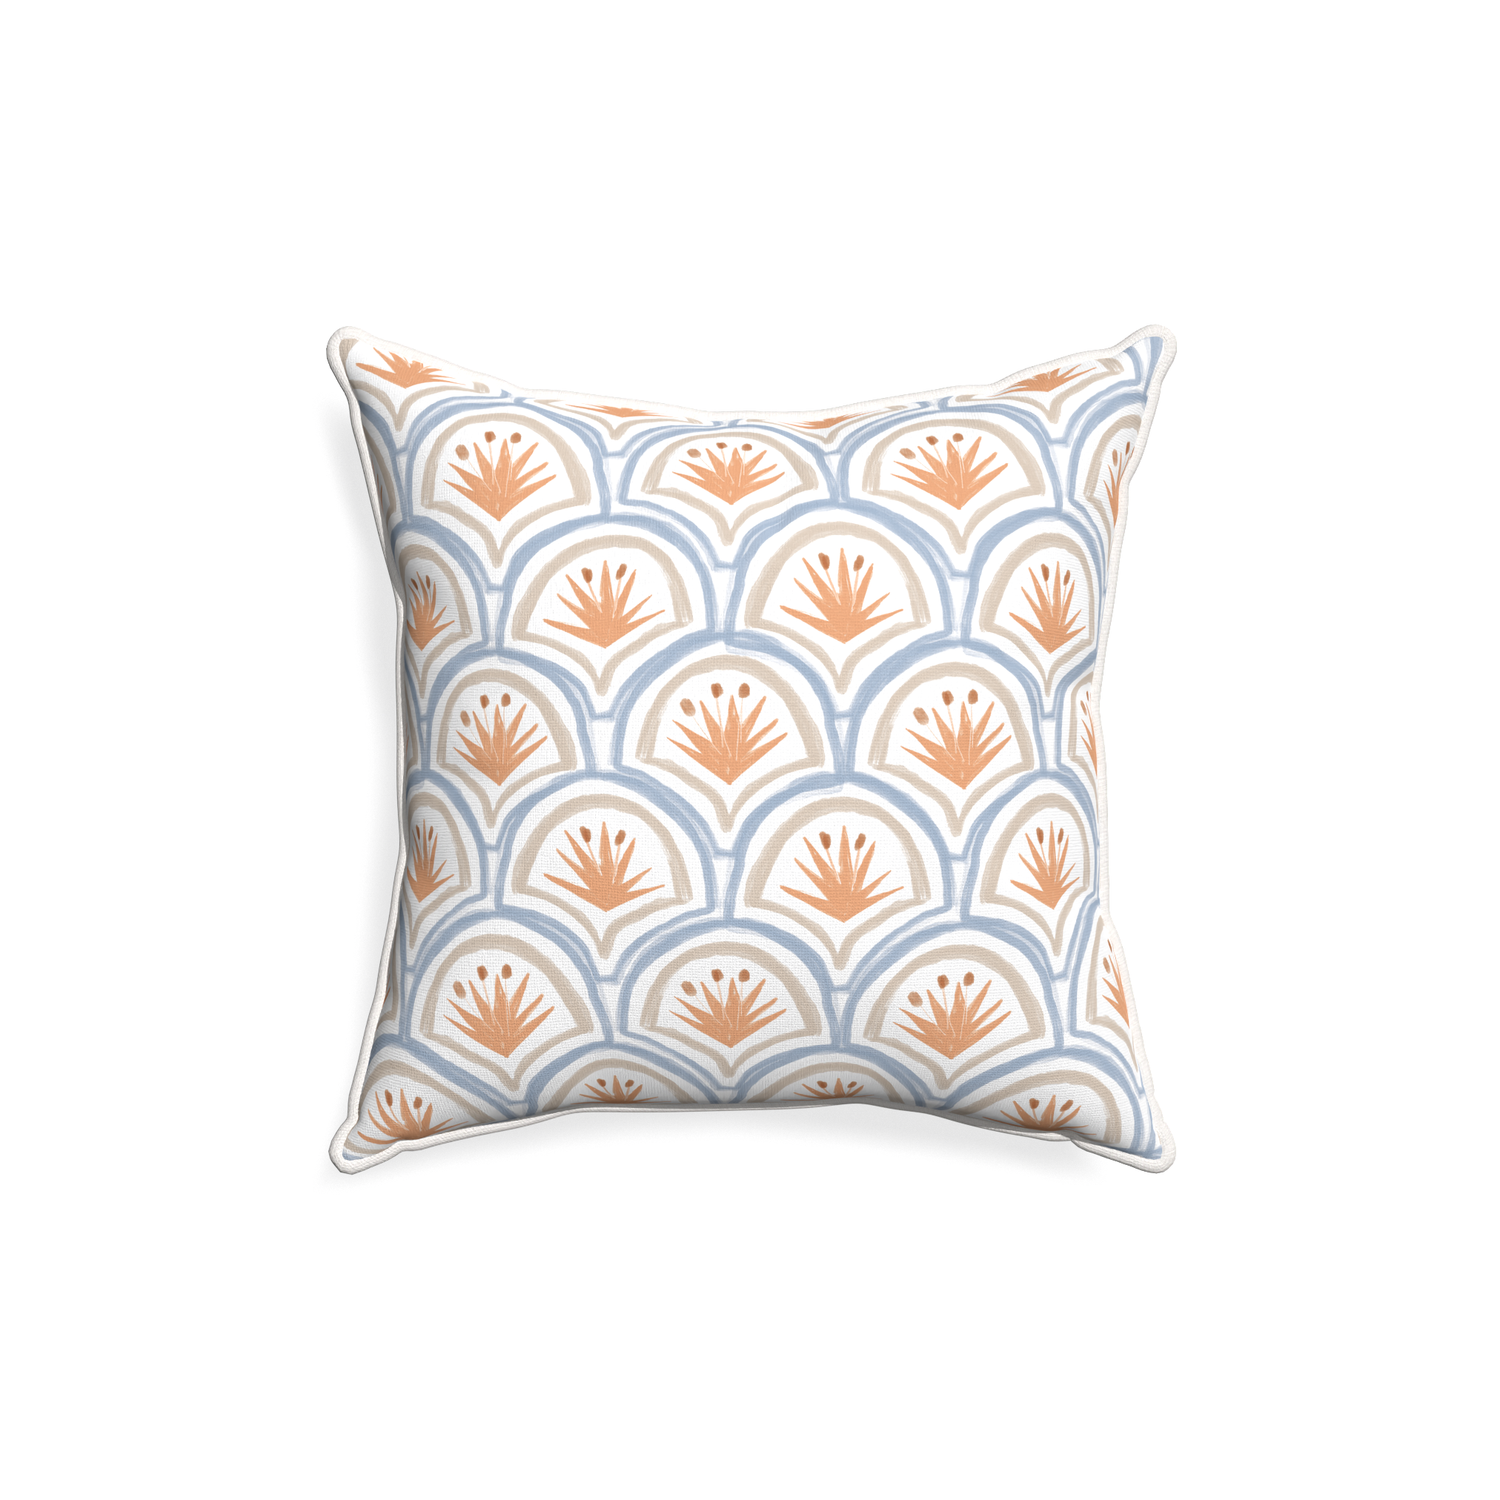 18-square thatcher apricot custom art deco palm patternpillow with snow piping on white background